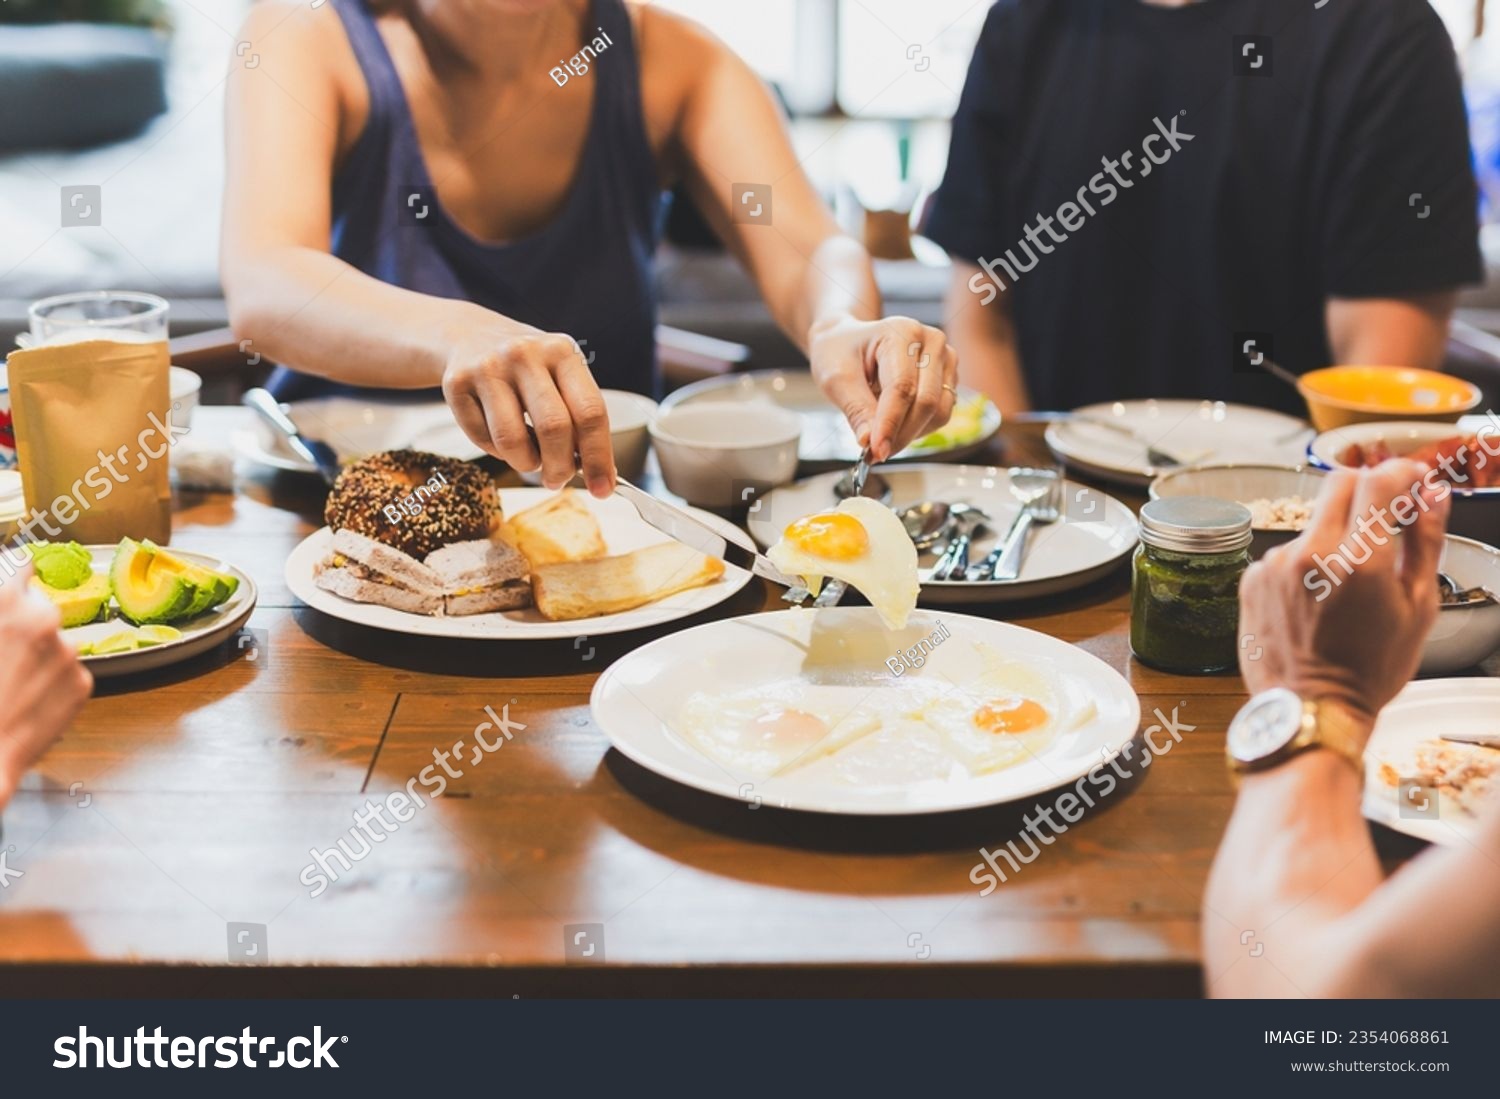 Woman eating fried eggs breakfast with friends on wooden table #2354068861